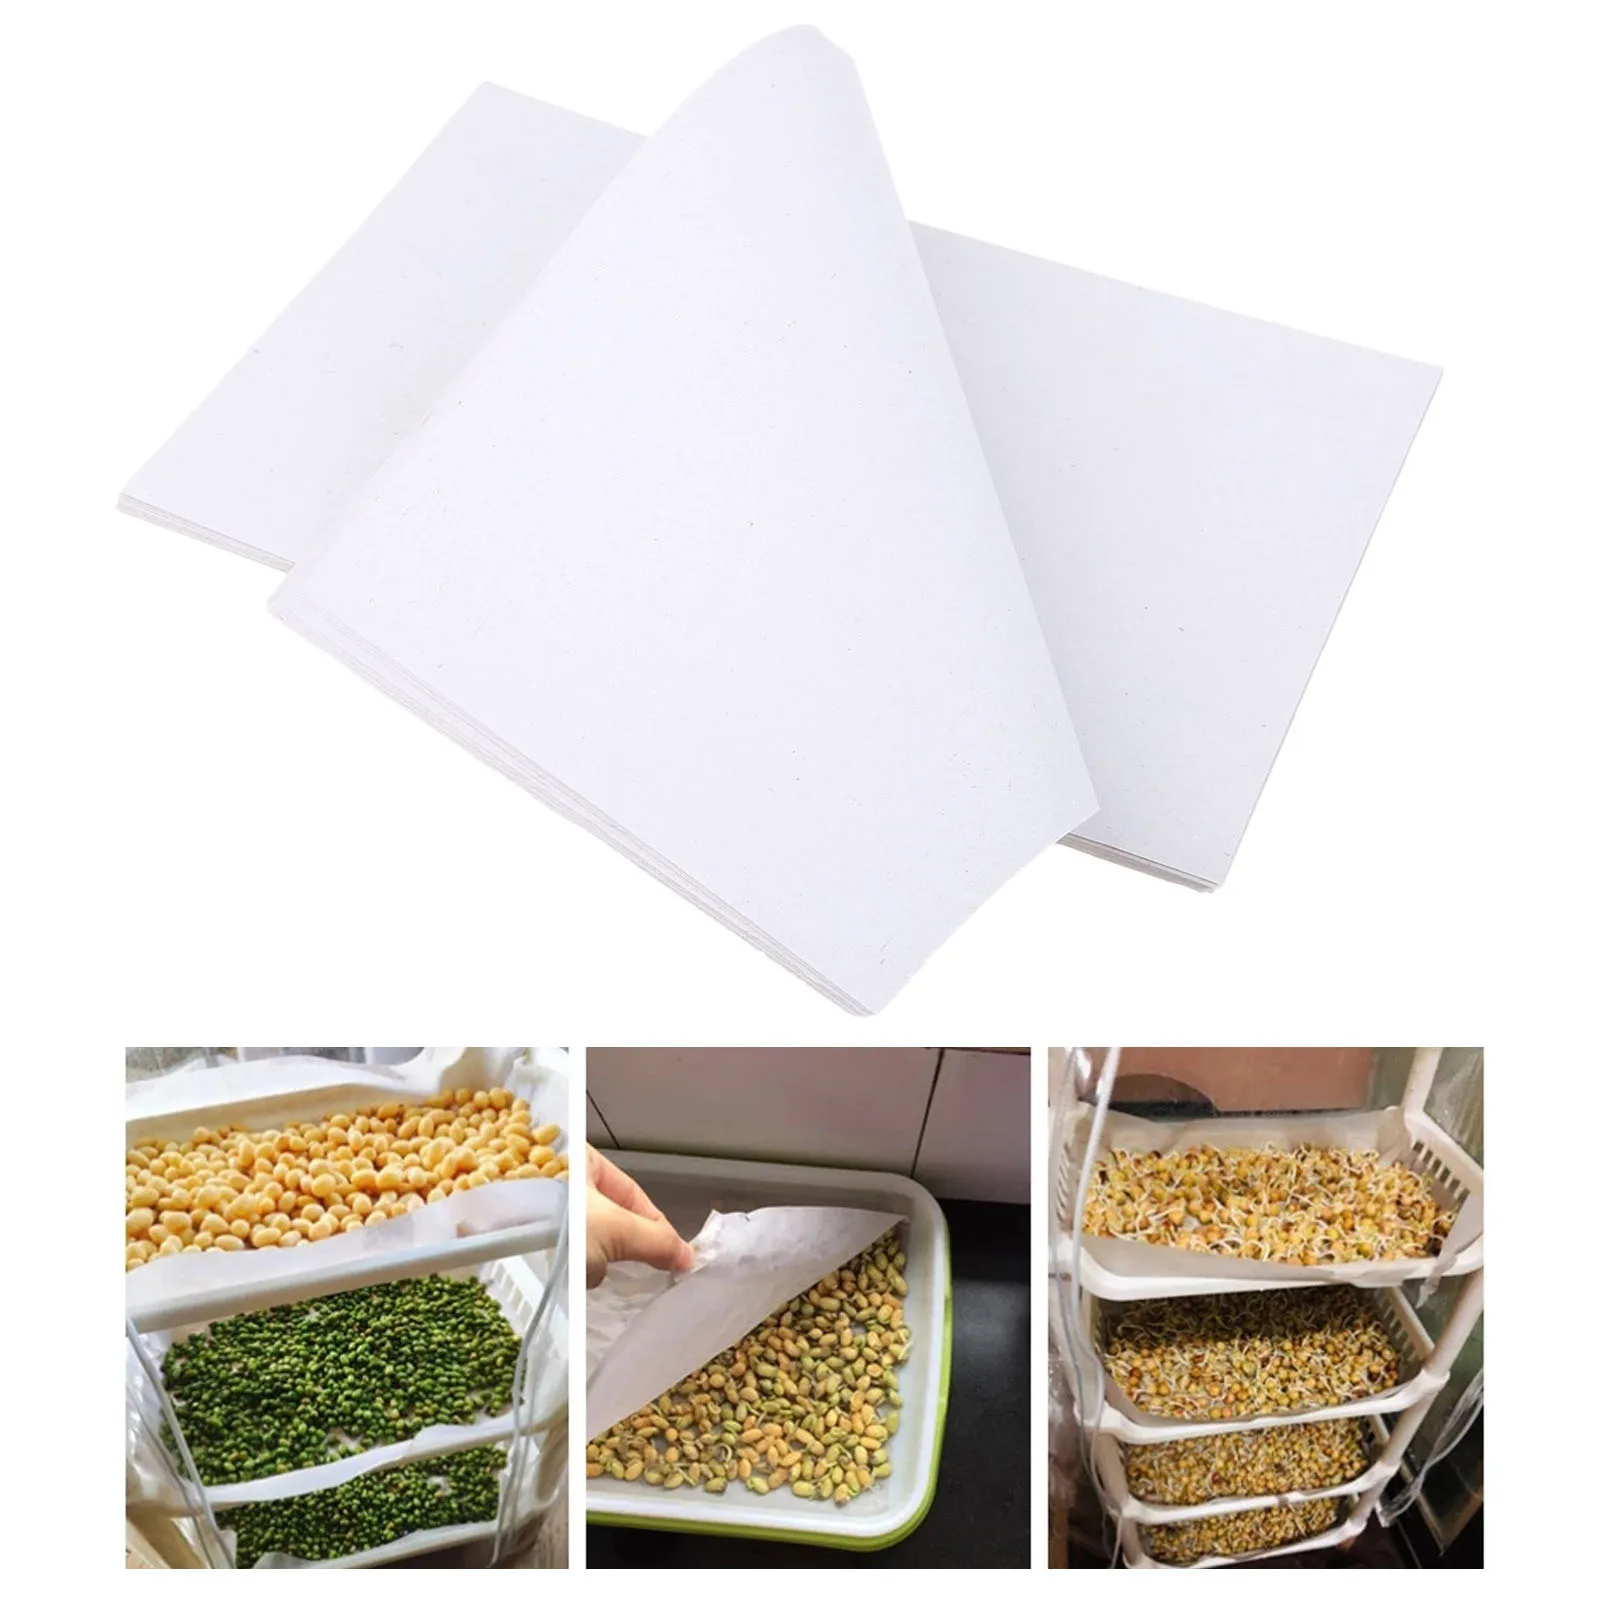 Cultivation Sprout Plate Papers Growing Vegetable Paper Tray Pots Parts 